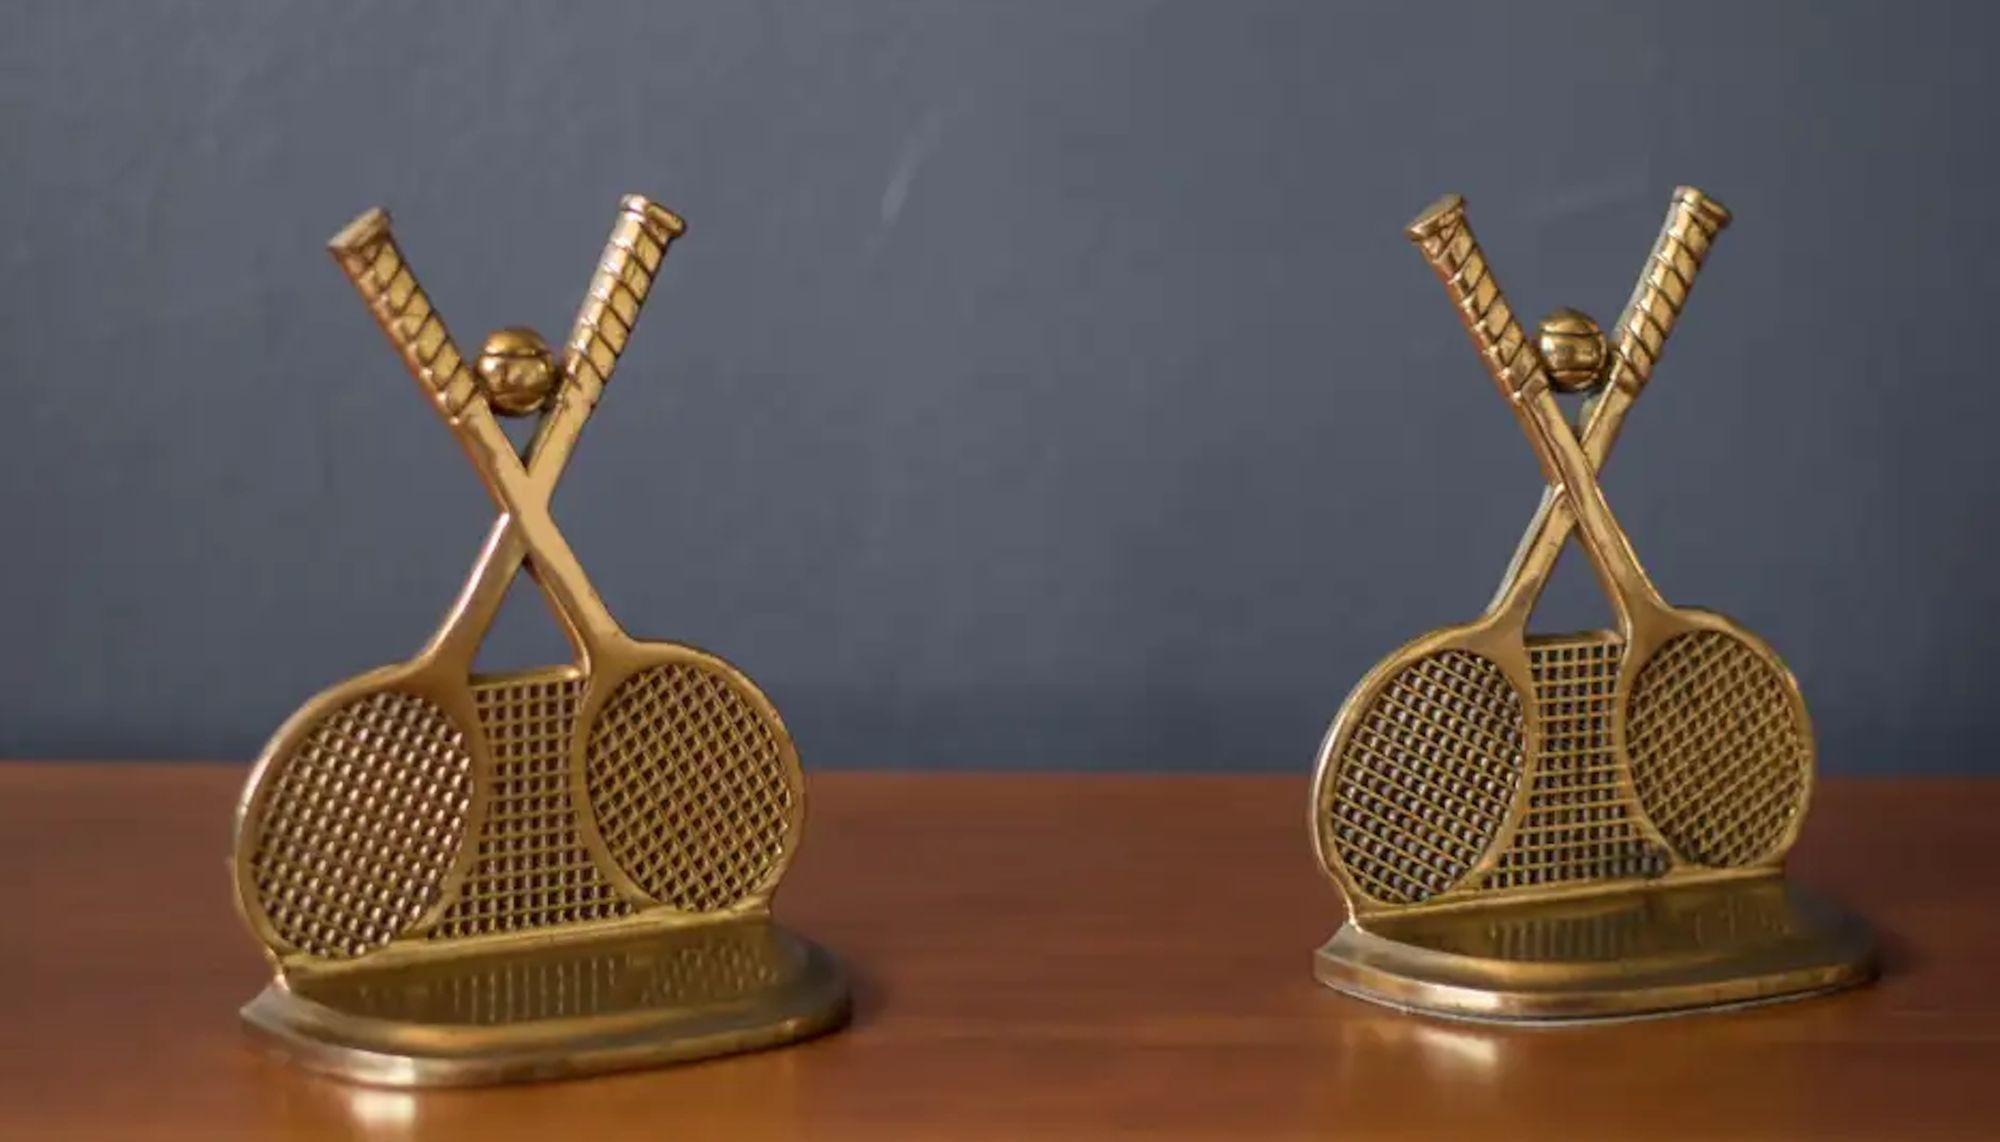 American Pair of Vintage Brass Tennis Racket and Ball Bookends Vintage 1970s Collectible